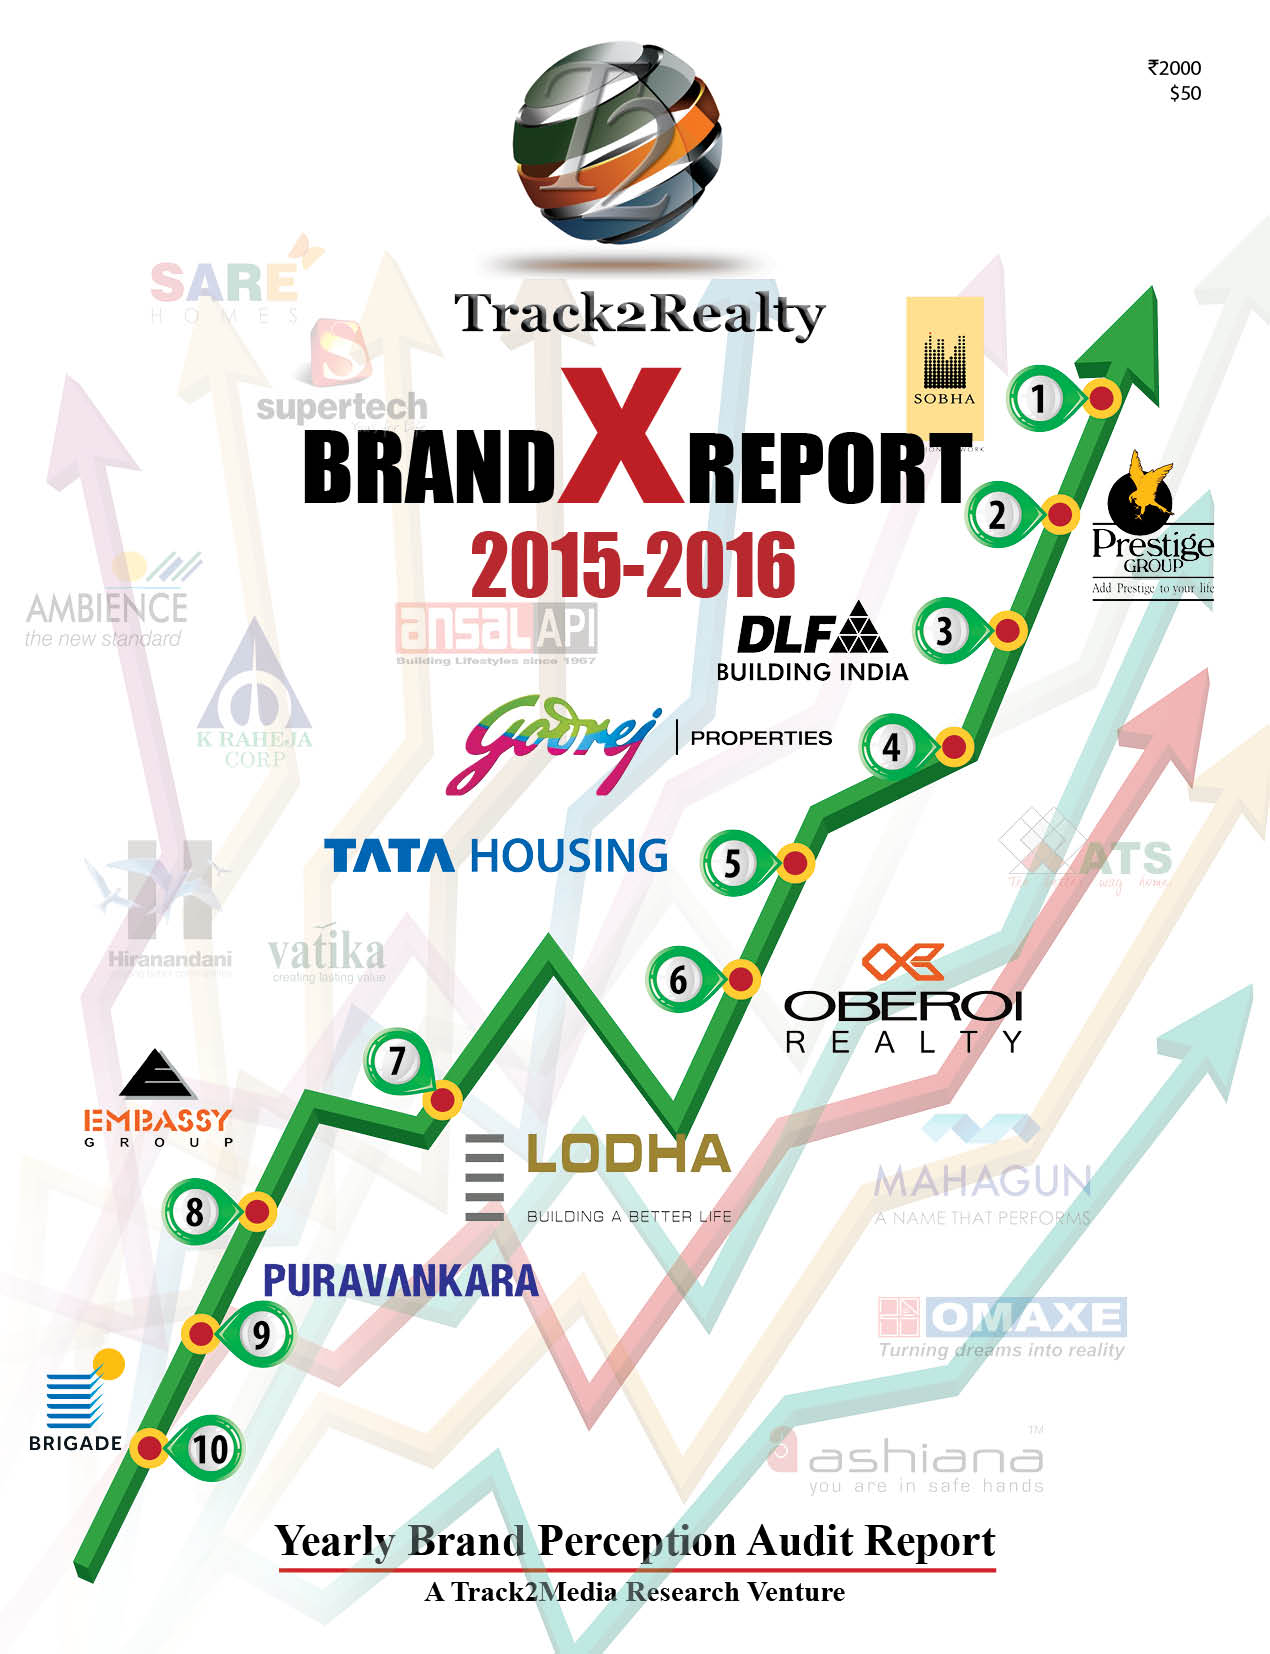 Track2Realty Brand X Report 2015-16, Real estate brand perception audit report, Track2Realty, Brand Study of Indian real estate, India real estate news, Indian property market, Financial performance of Indian real estate